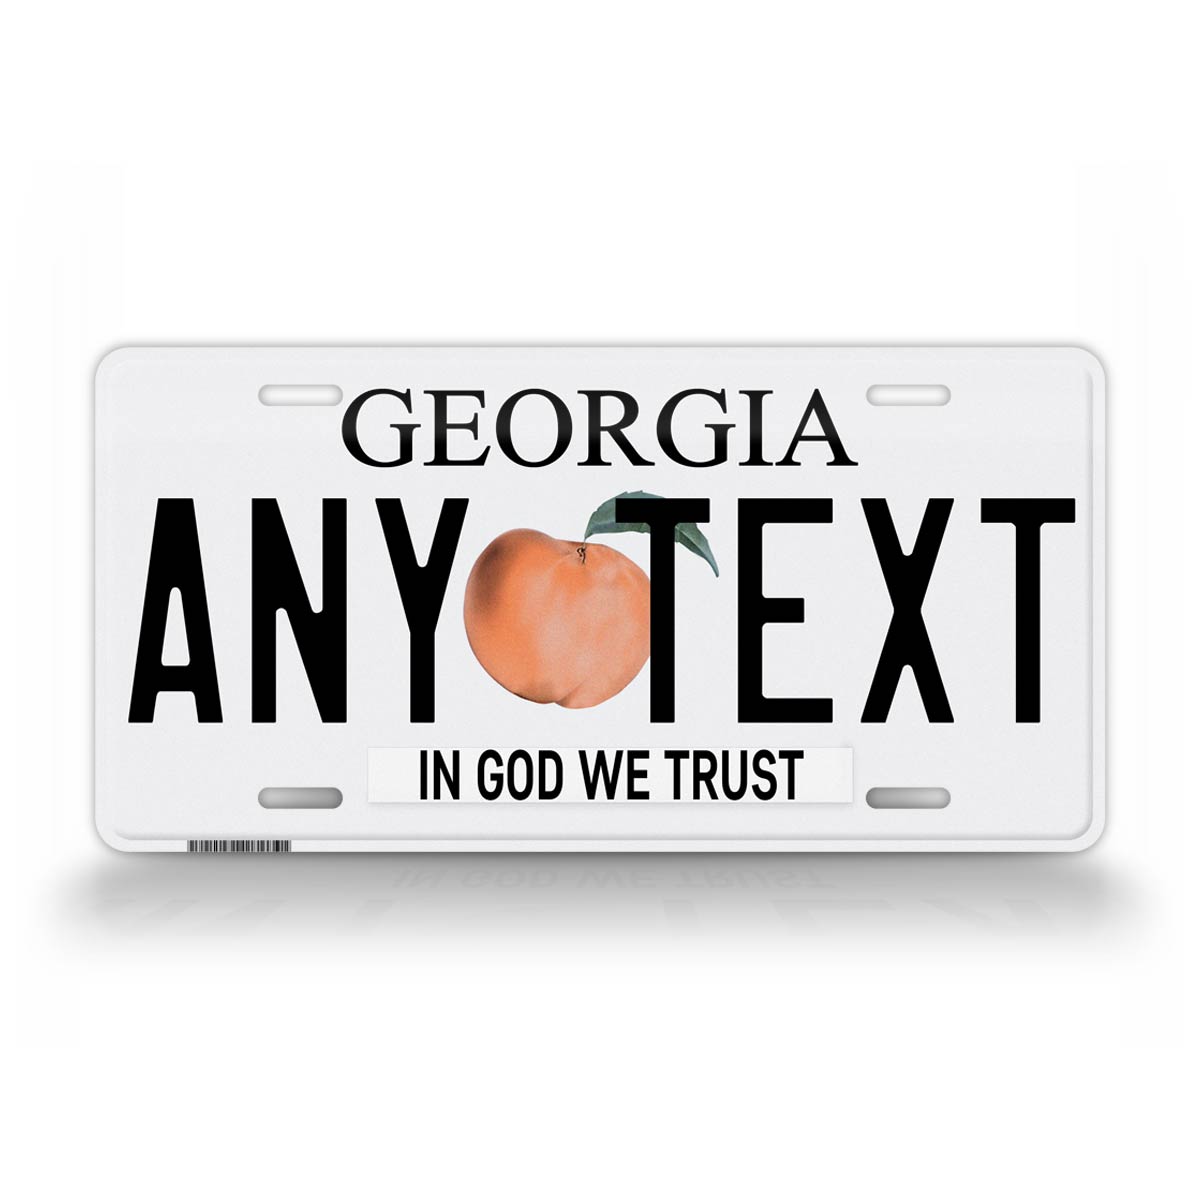 Personalized Novelty Georgia State License Plate 